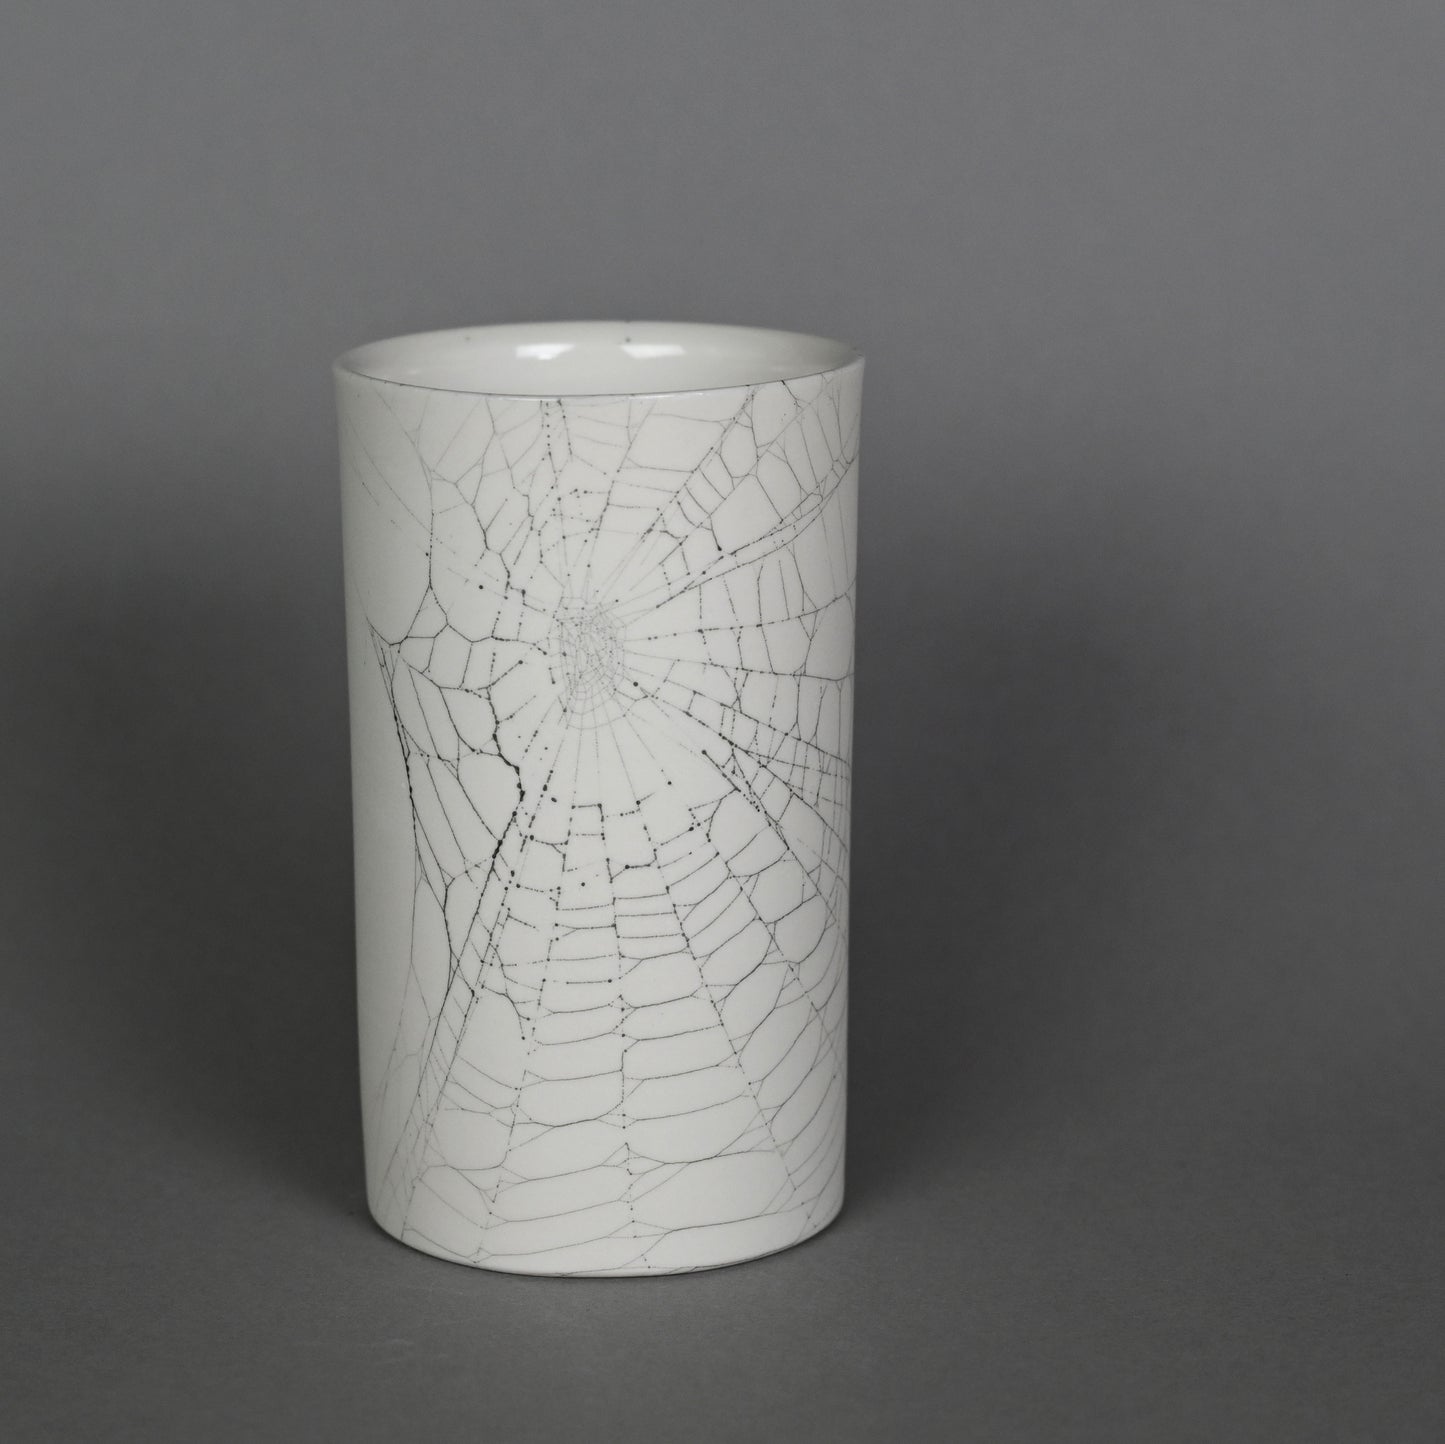 Web on Clay (198), Collected September 19, 2022